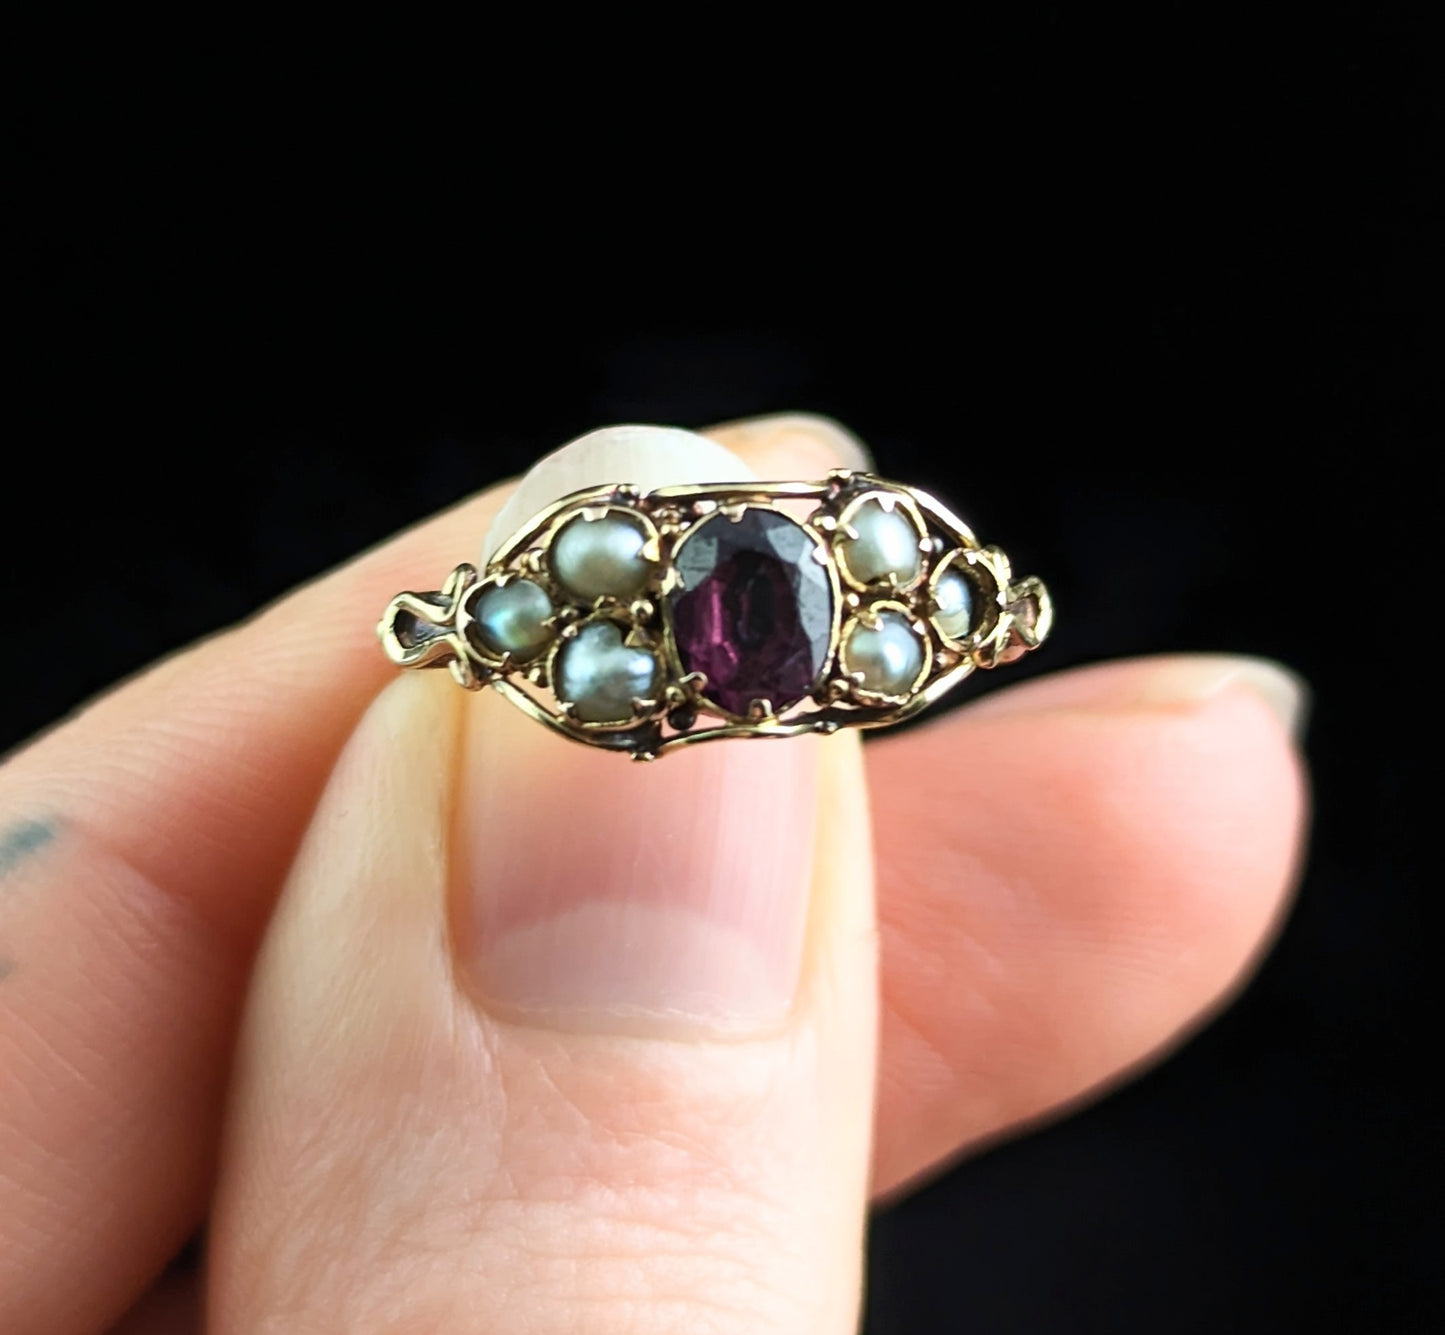 Antique Almandine Garnet and Pearl ring, 22ct gold, early Victorian